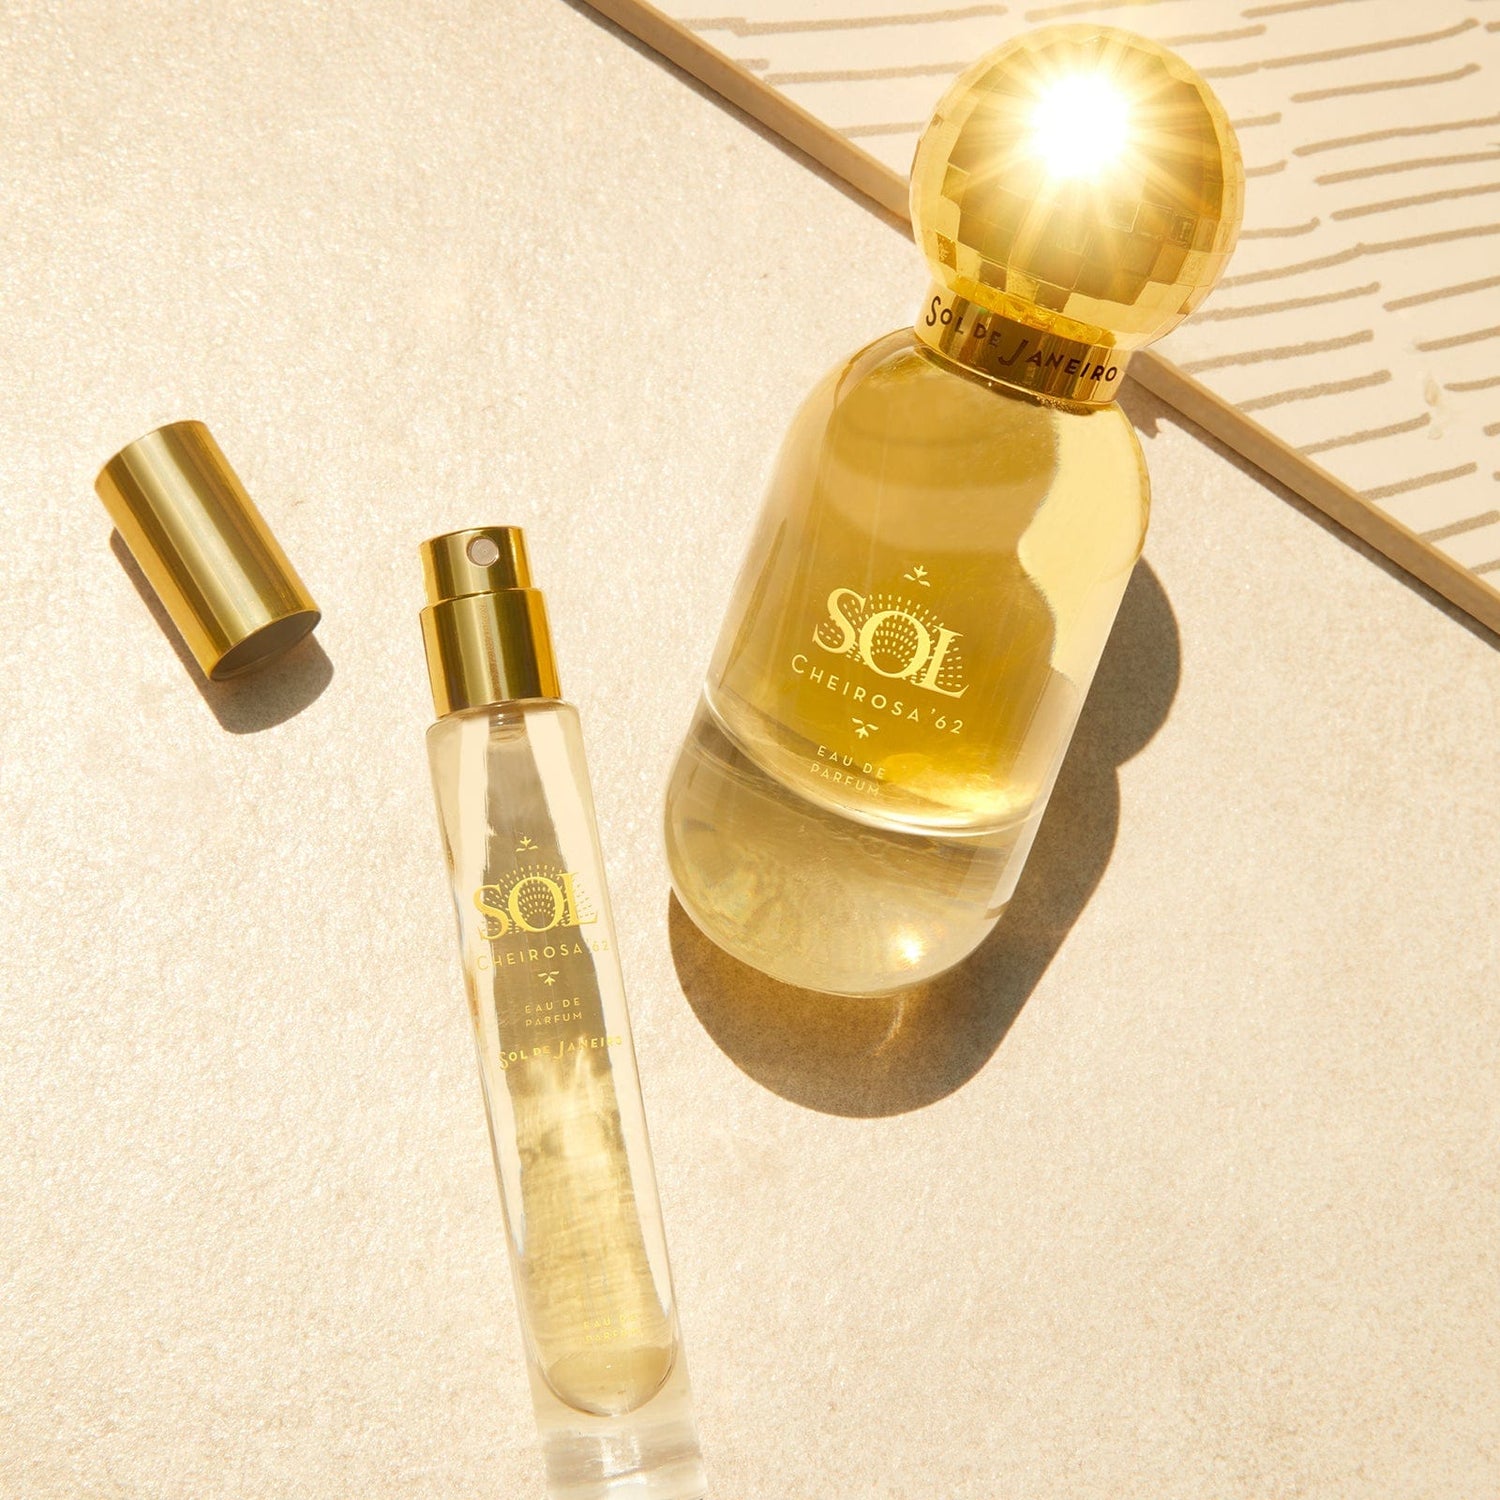 Women's Top 5 Signature Scents - Quality Fragrance Oils - Dupe perfume  impression, smell-a-like generic oils.